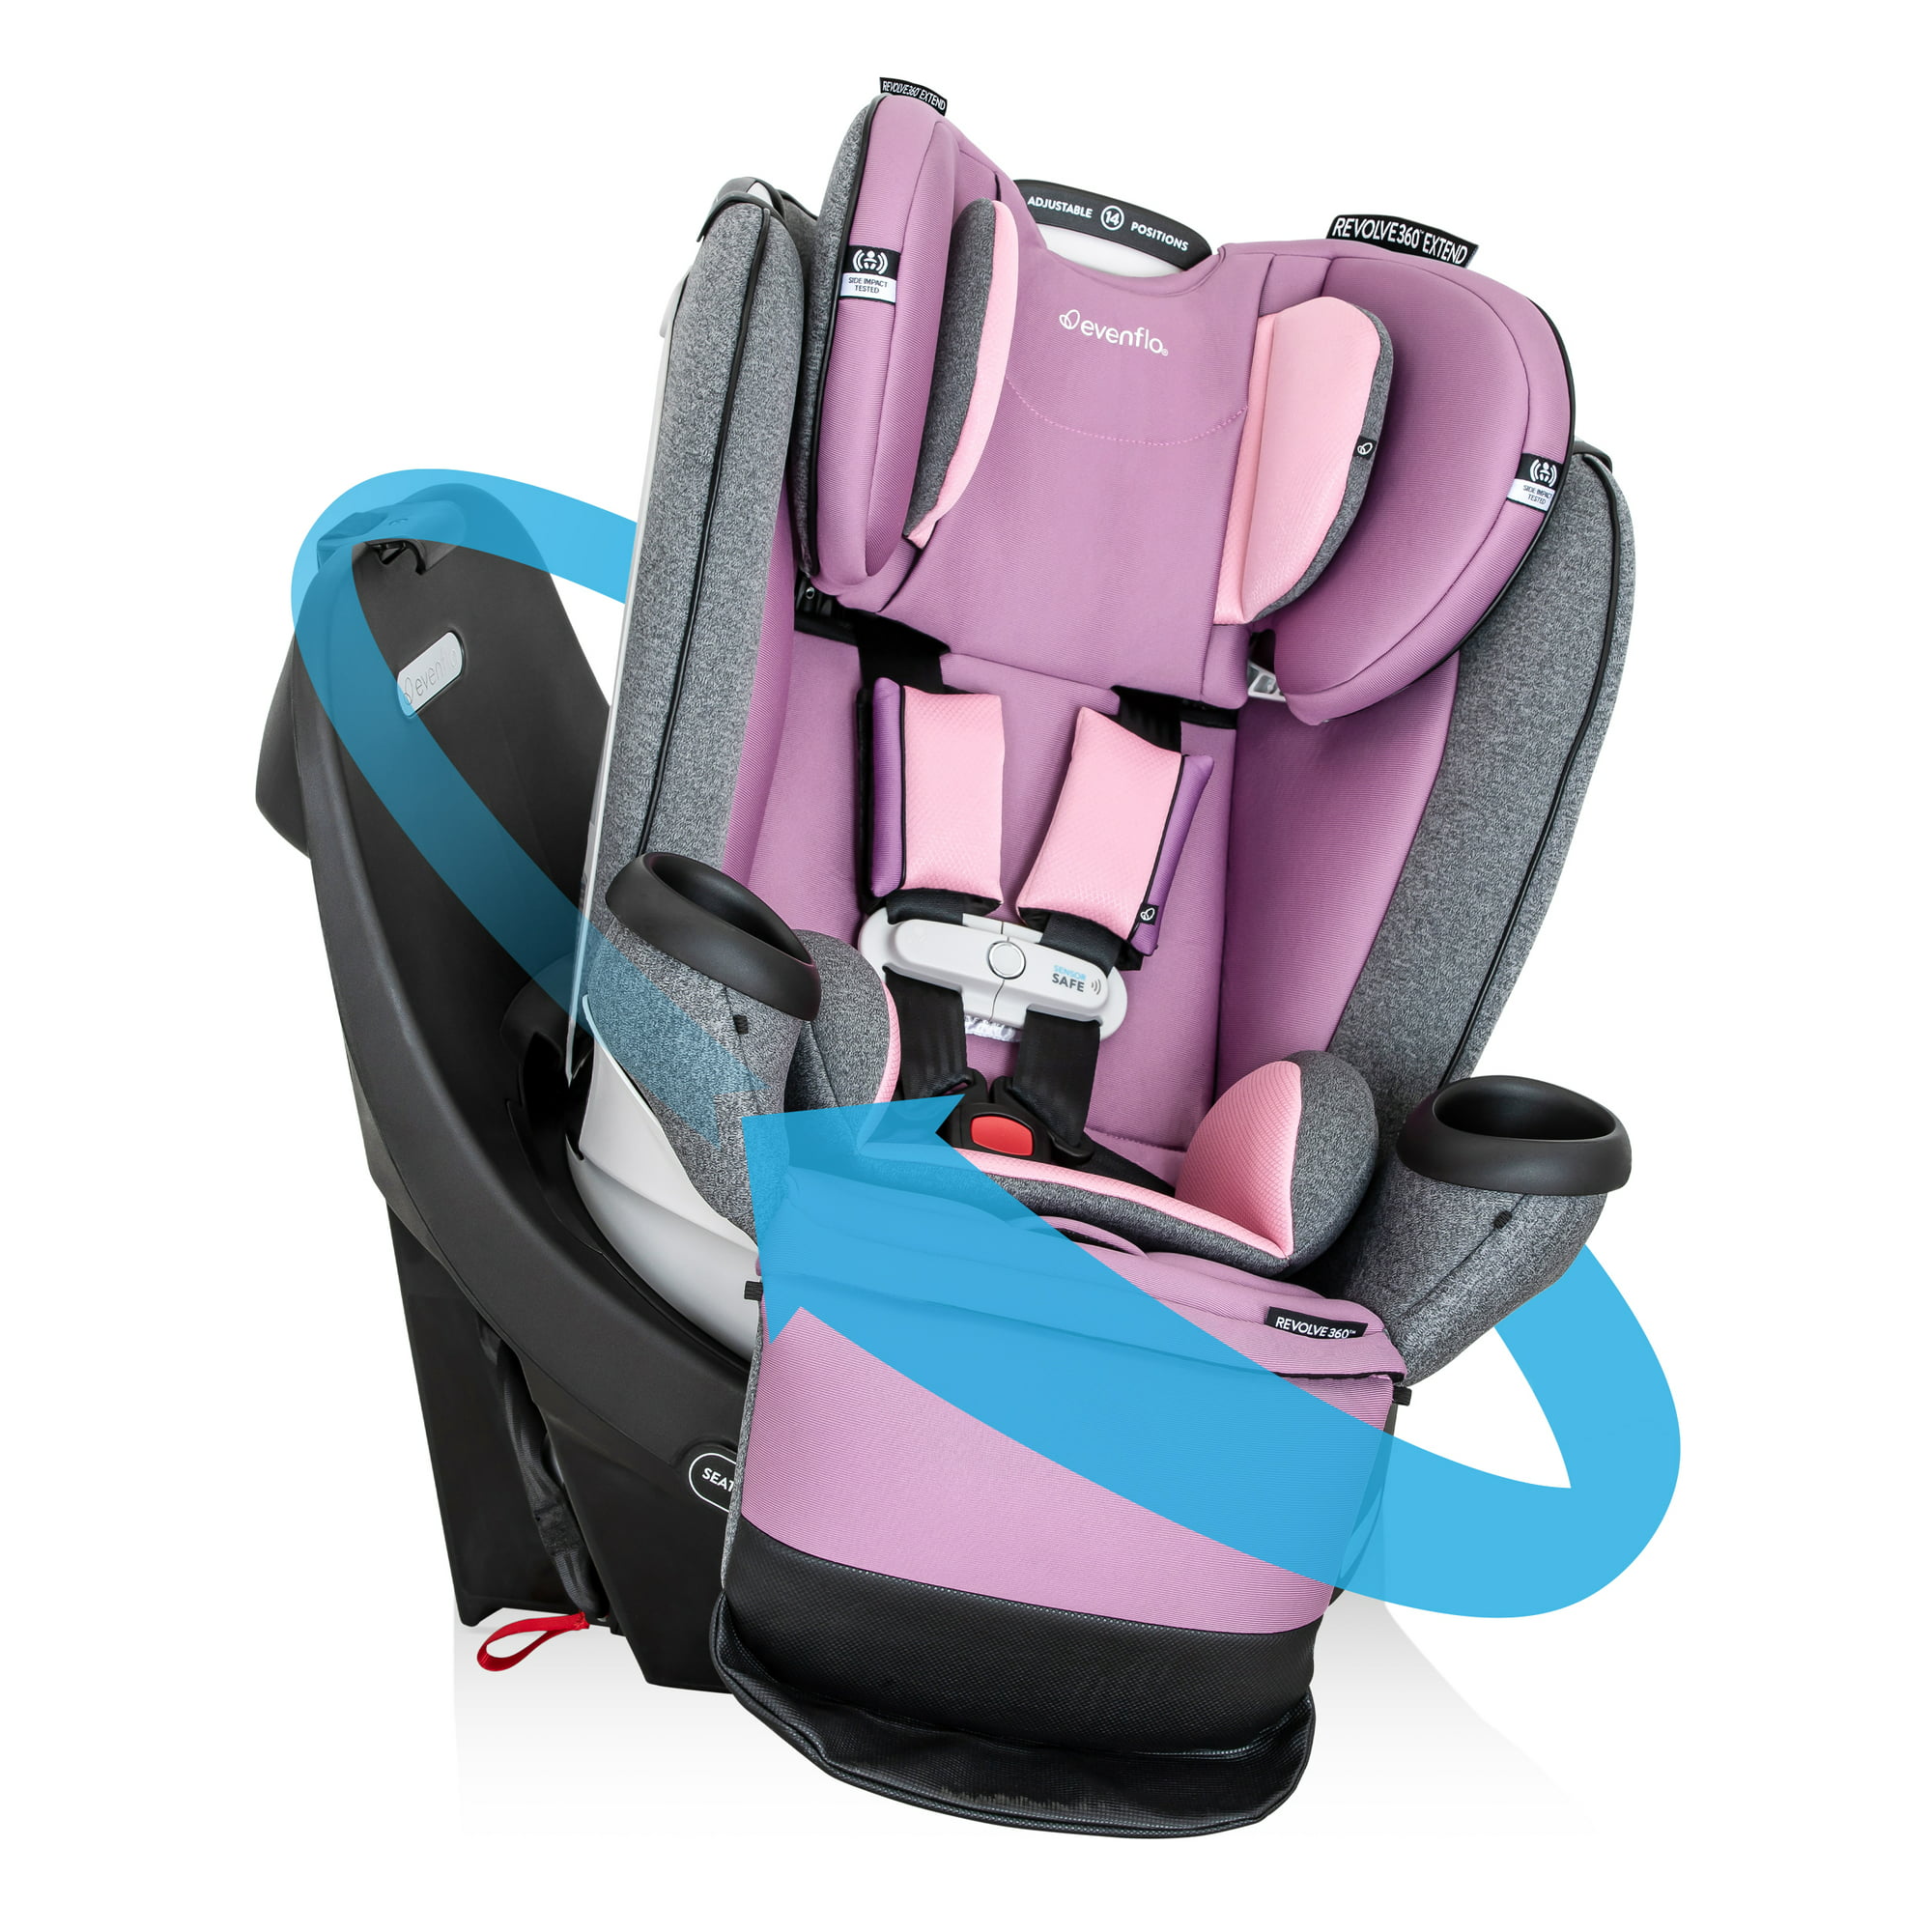 Gold Revolve360 Extend All-in-One Rotational Car Seat with SensorSafe